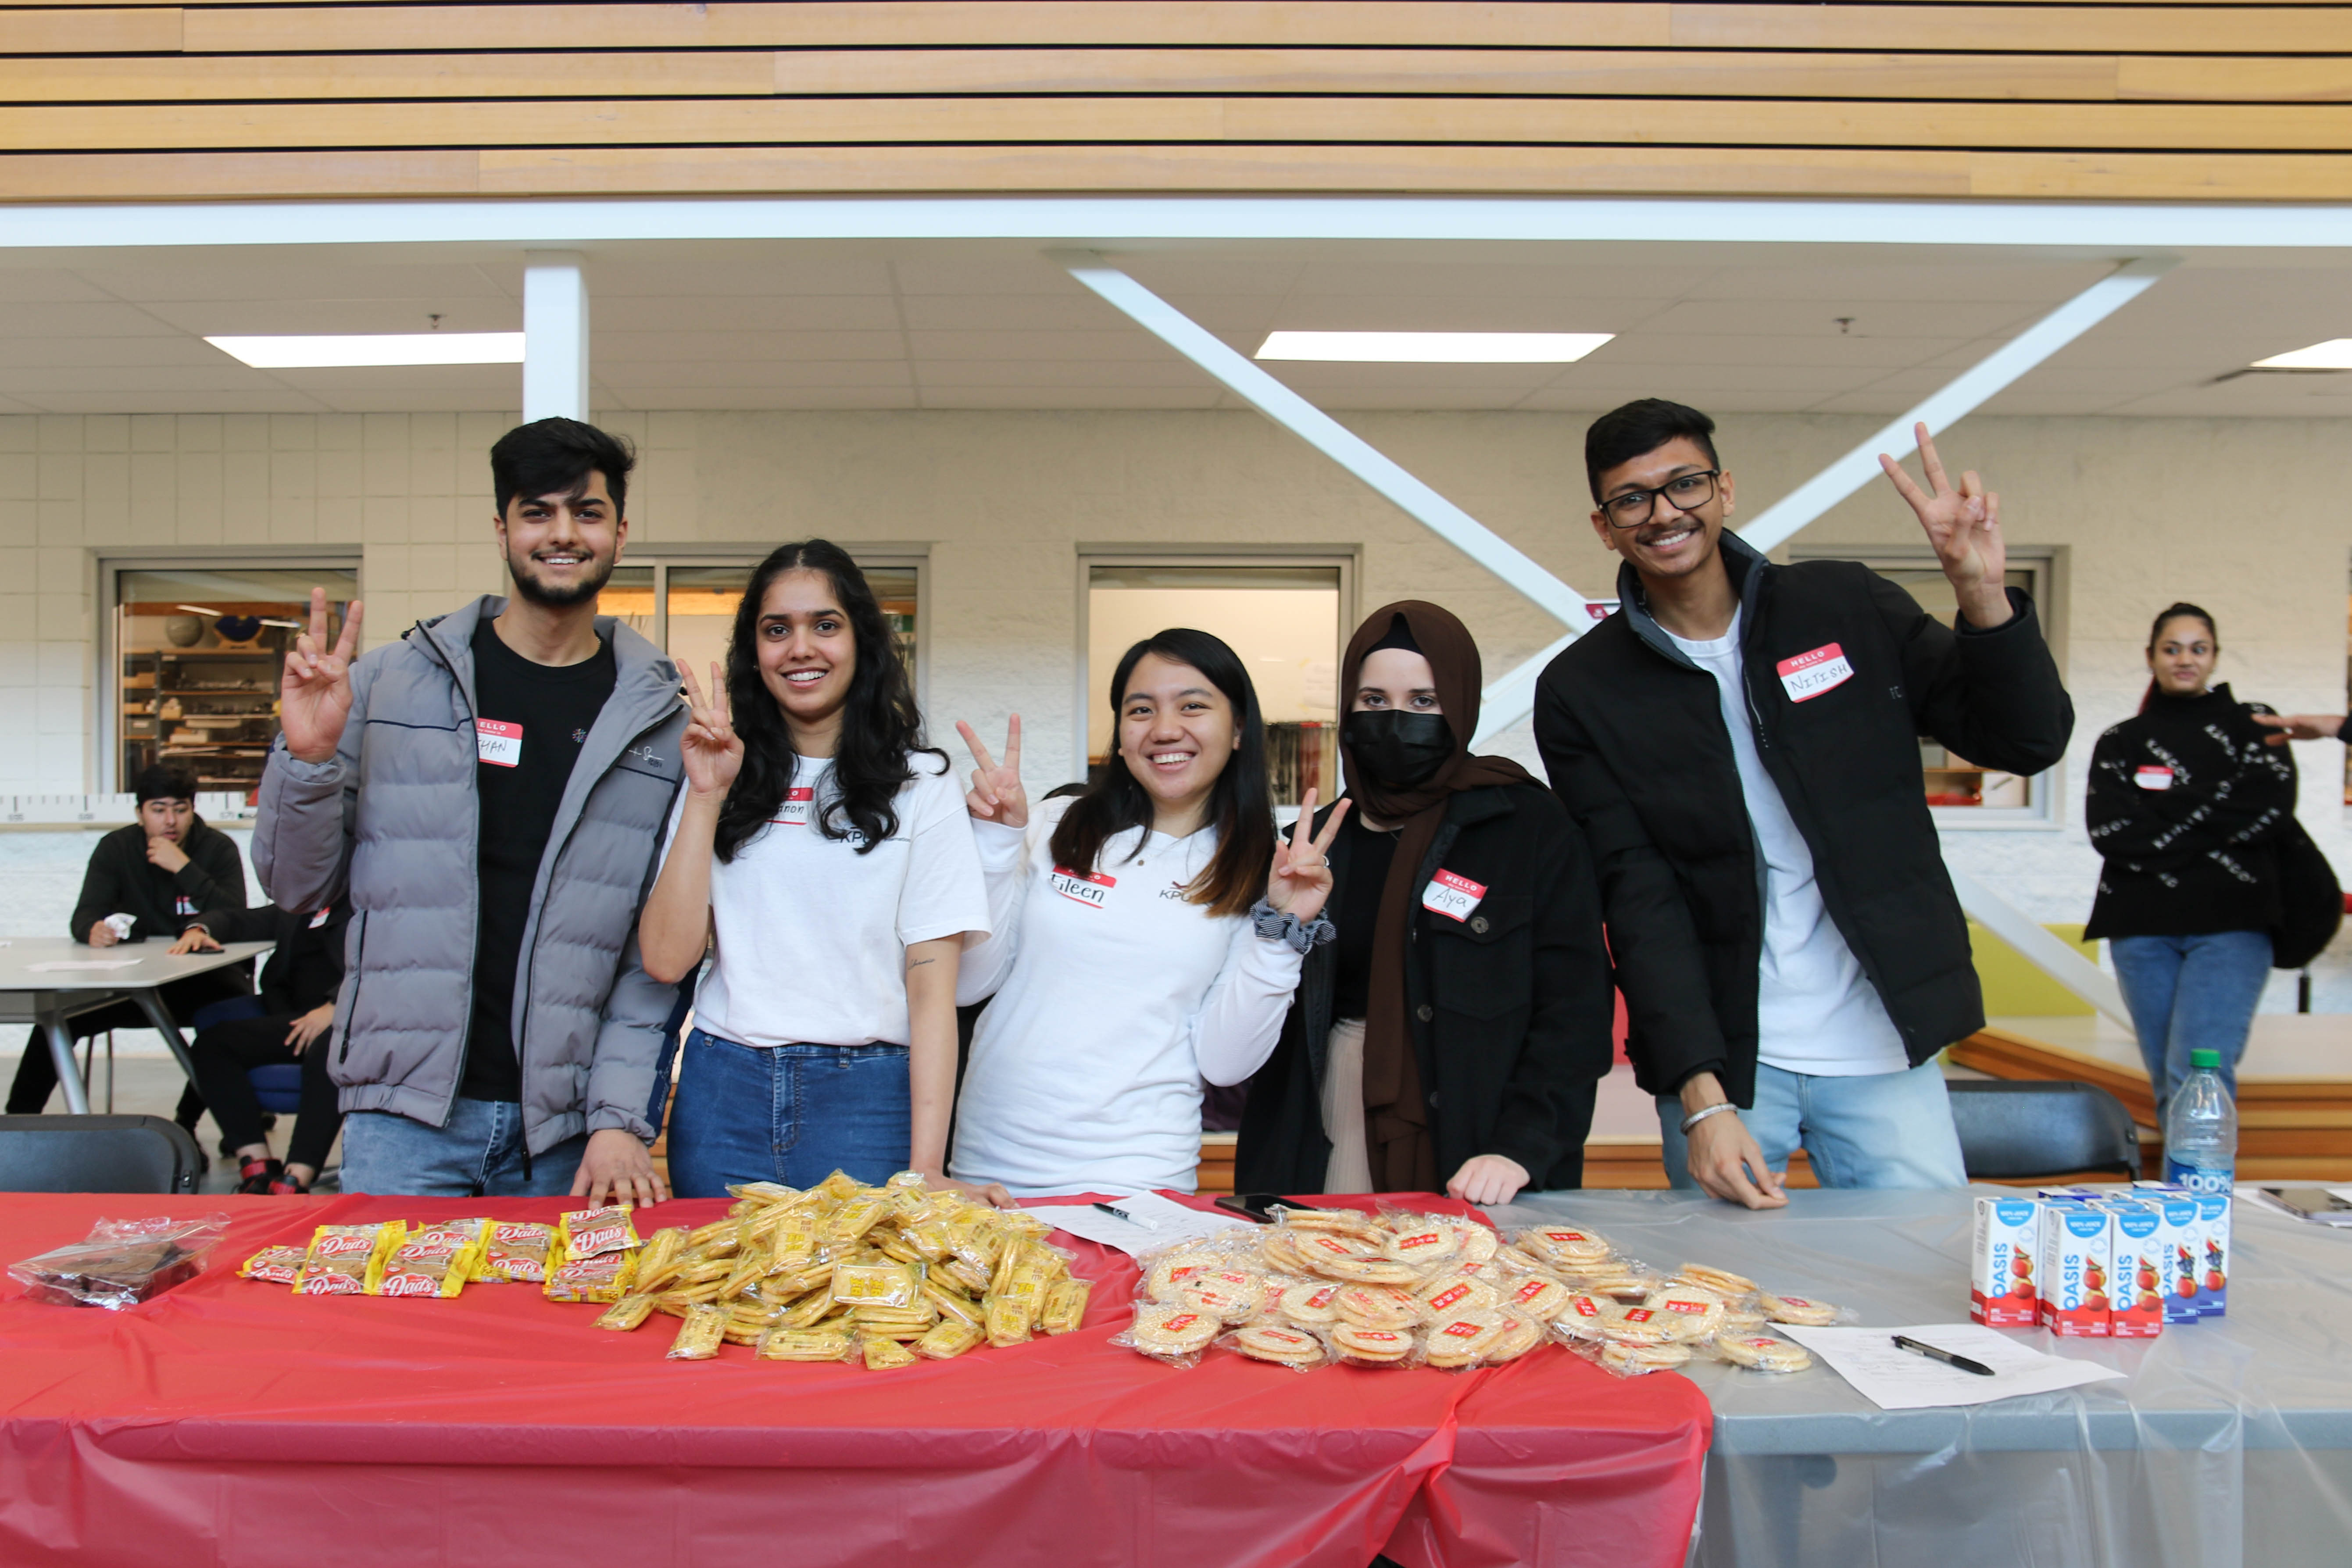 Group of student life volunteers at an event inside the Fir building.